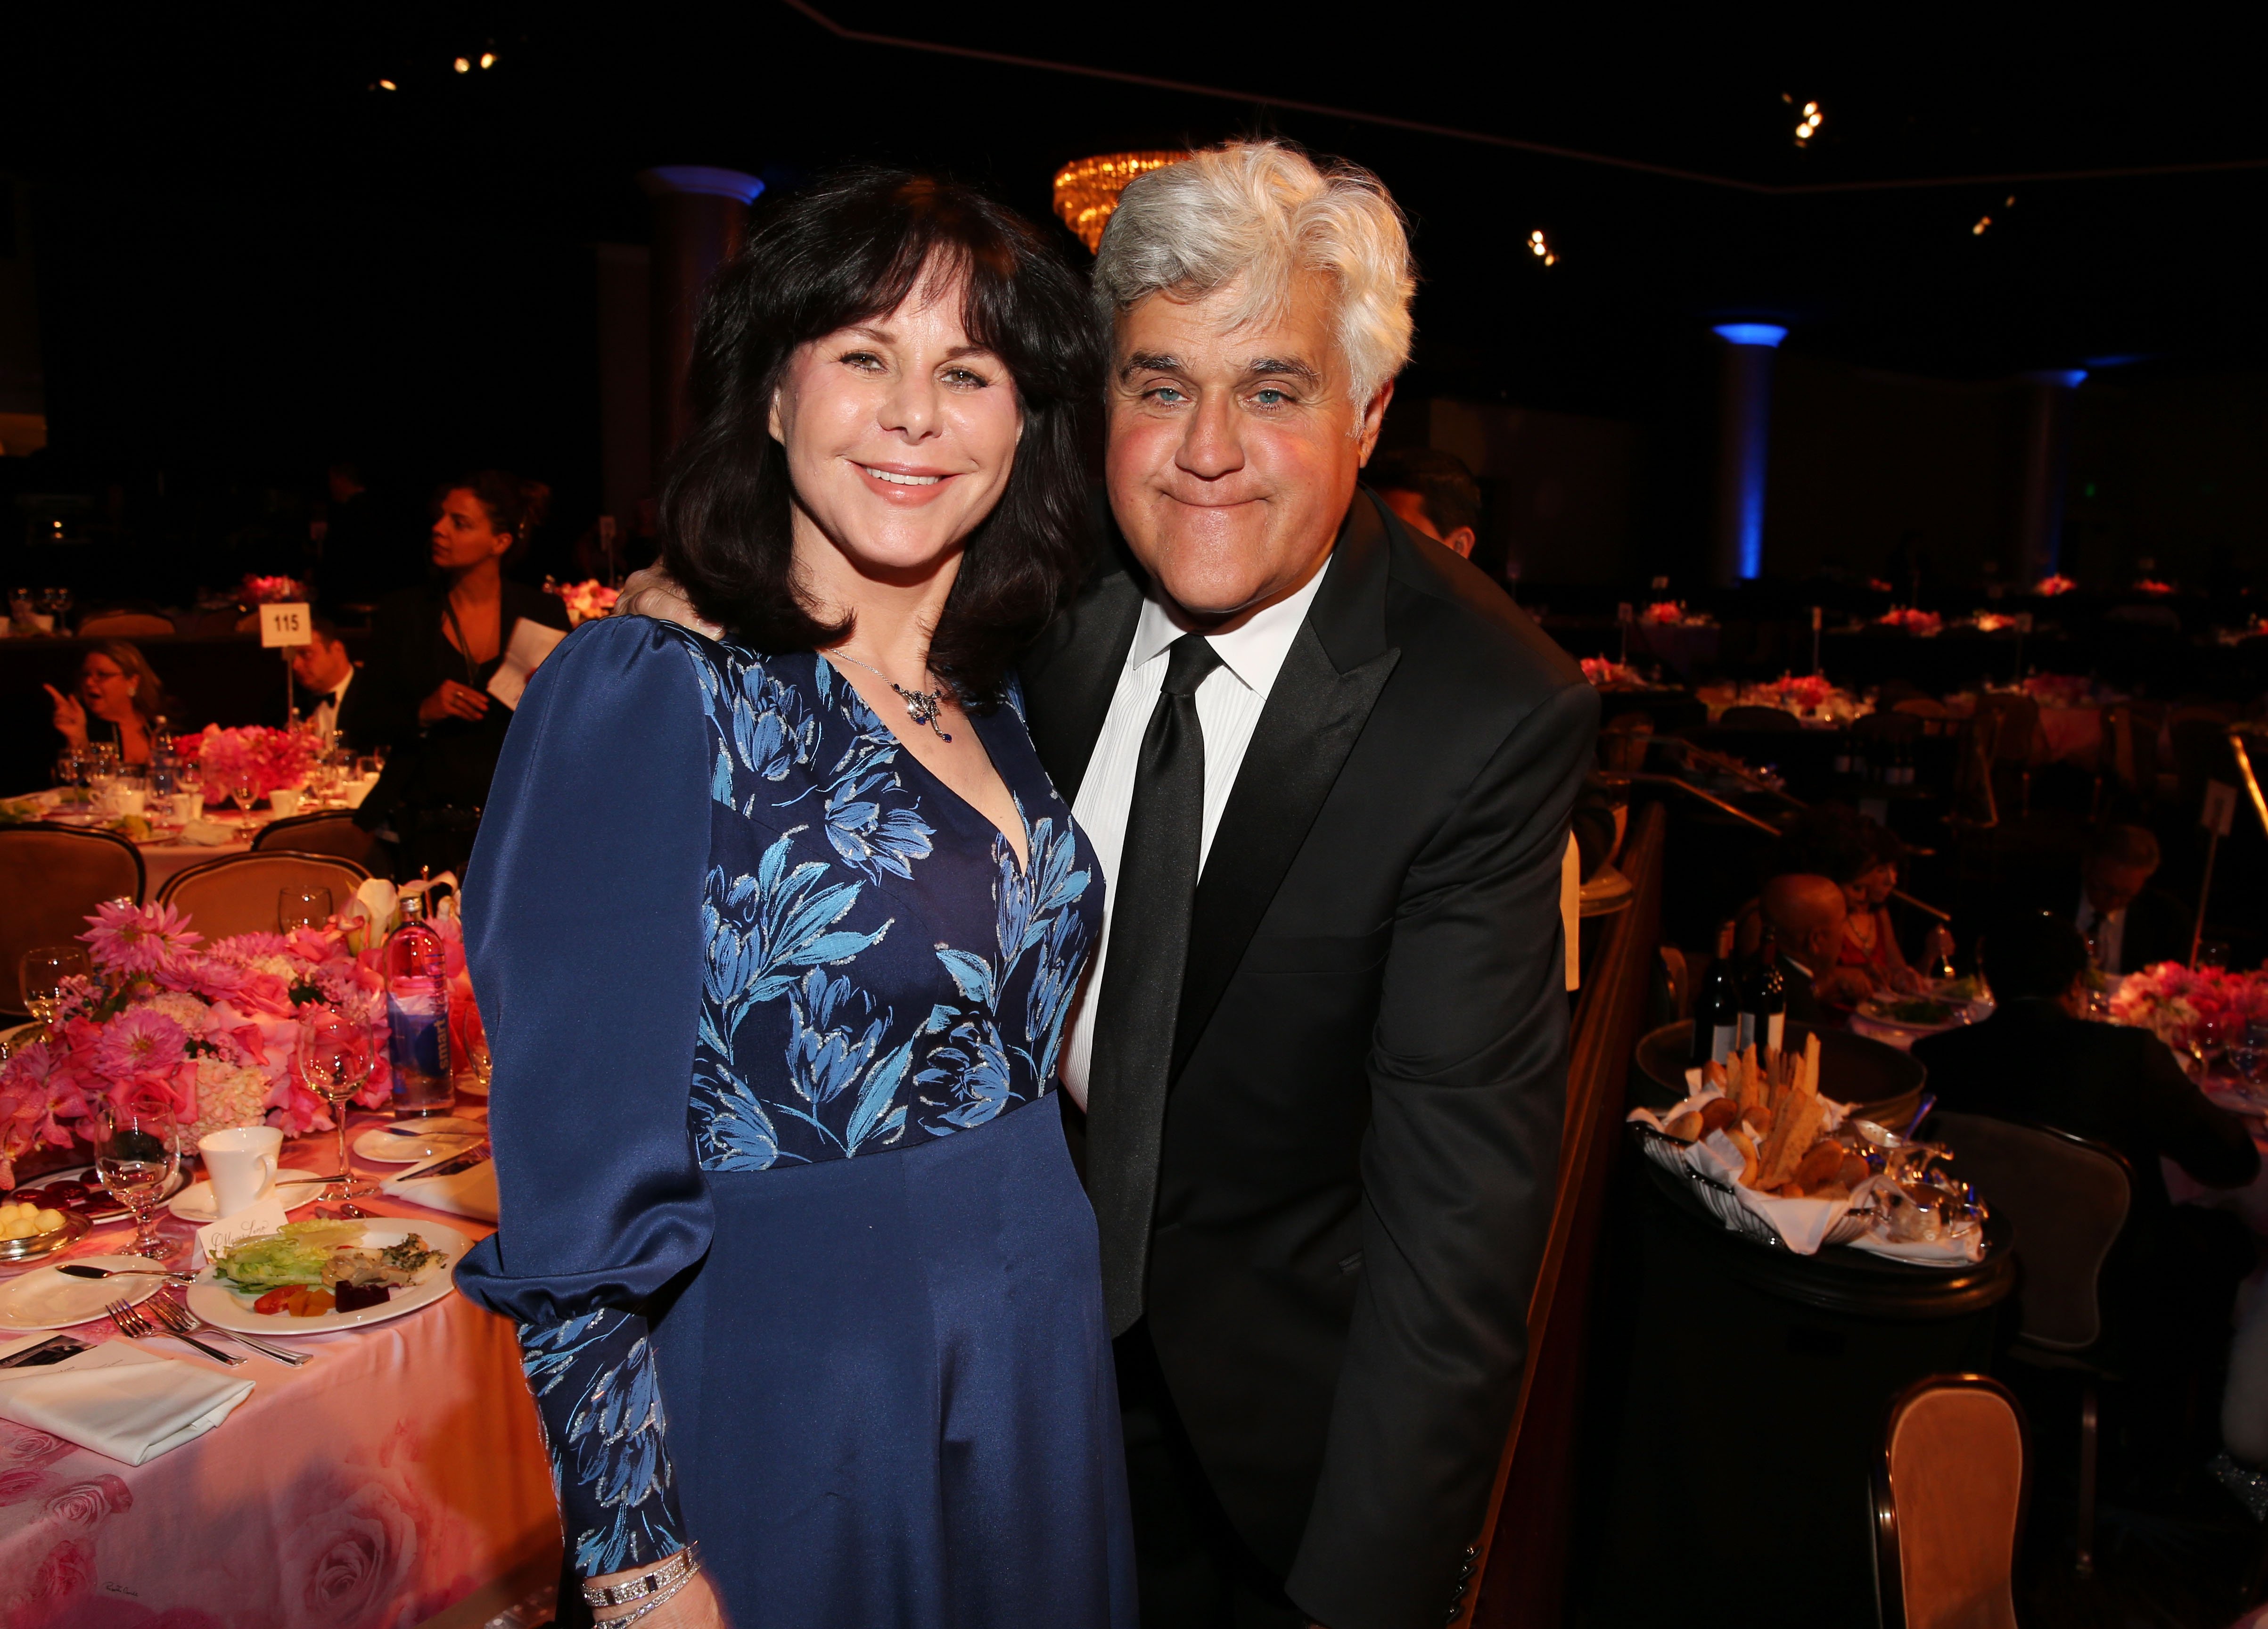 Mavis Leno and her husband Jay Leno attend the 26th Anniversary Carousel Of Hope Ball presented by Mercedes-Benz at The Beverly Hilton Hotel on October 20, 2012, in Beverly Hills, California. | Source: Getty Images